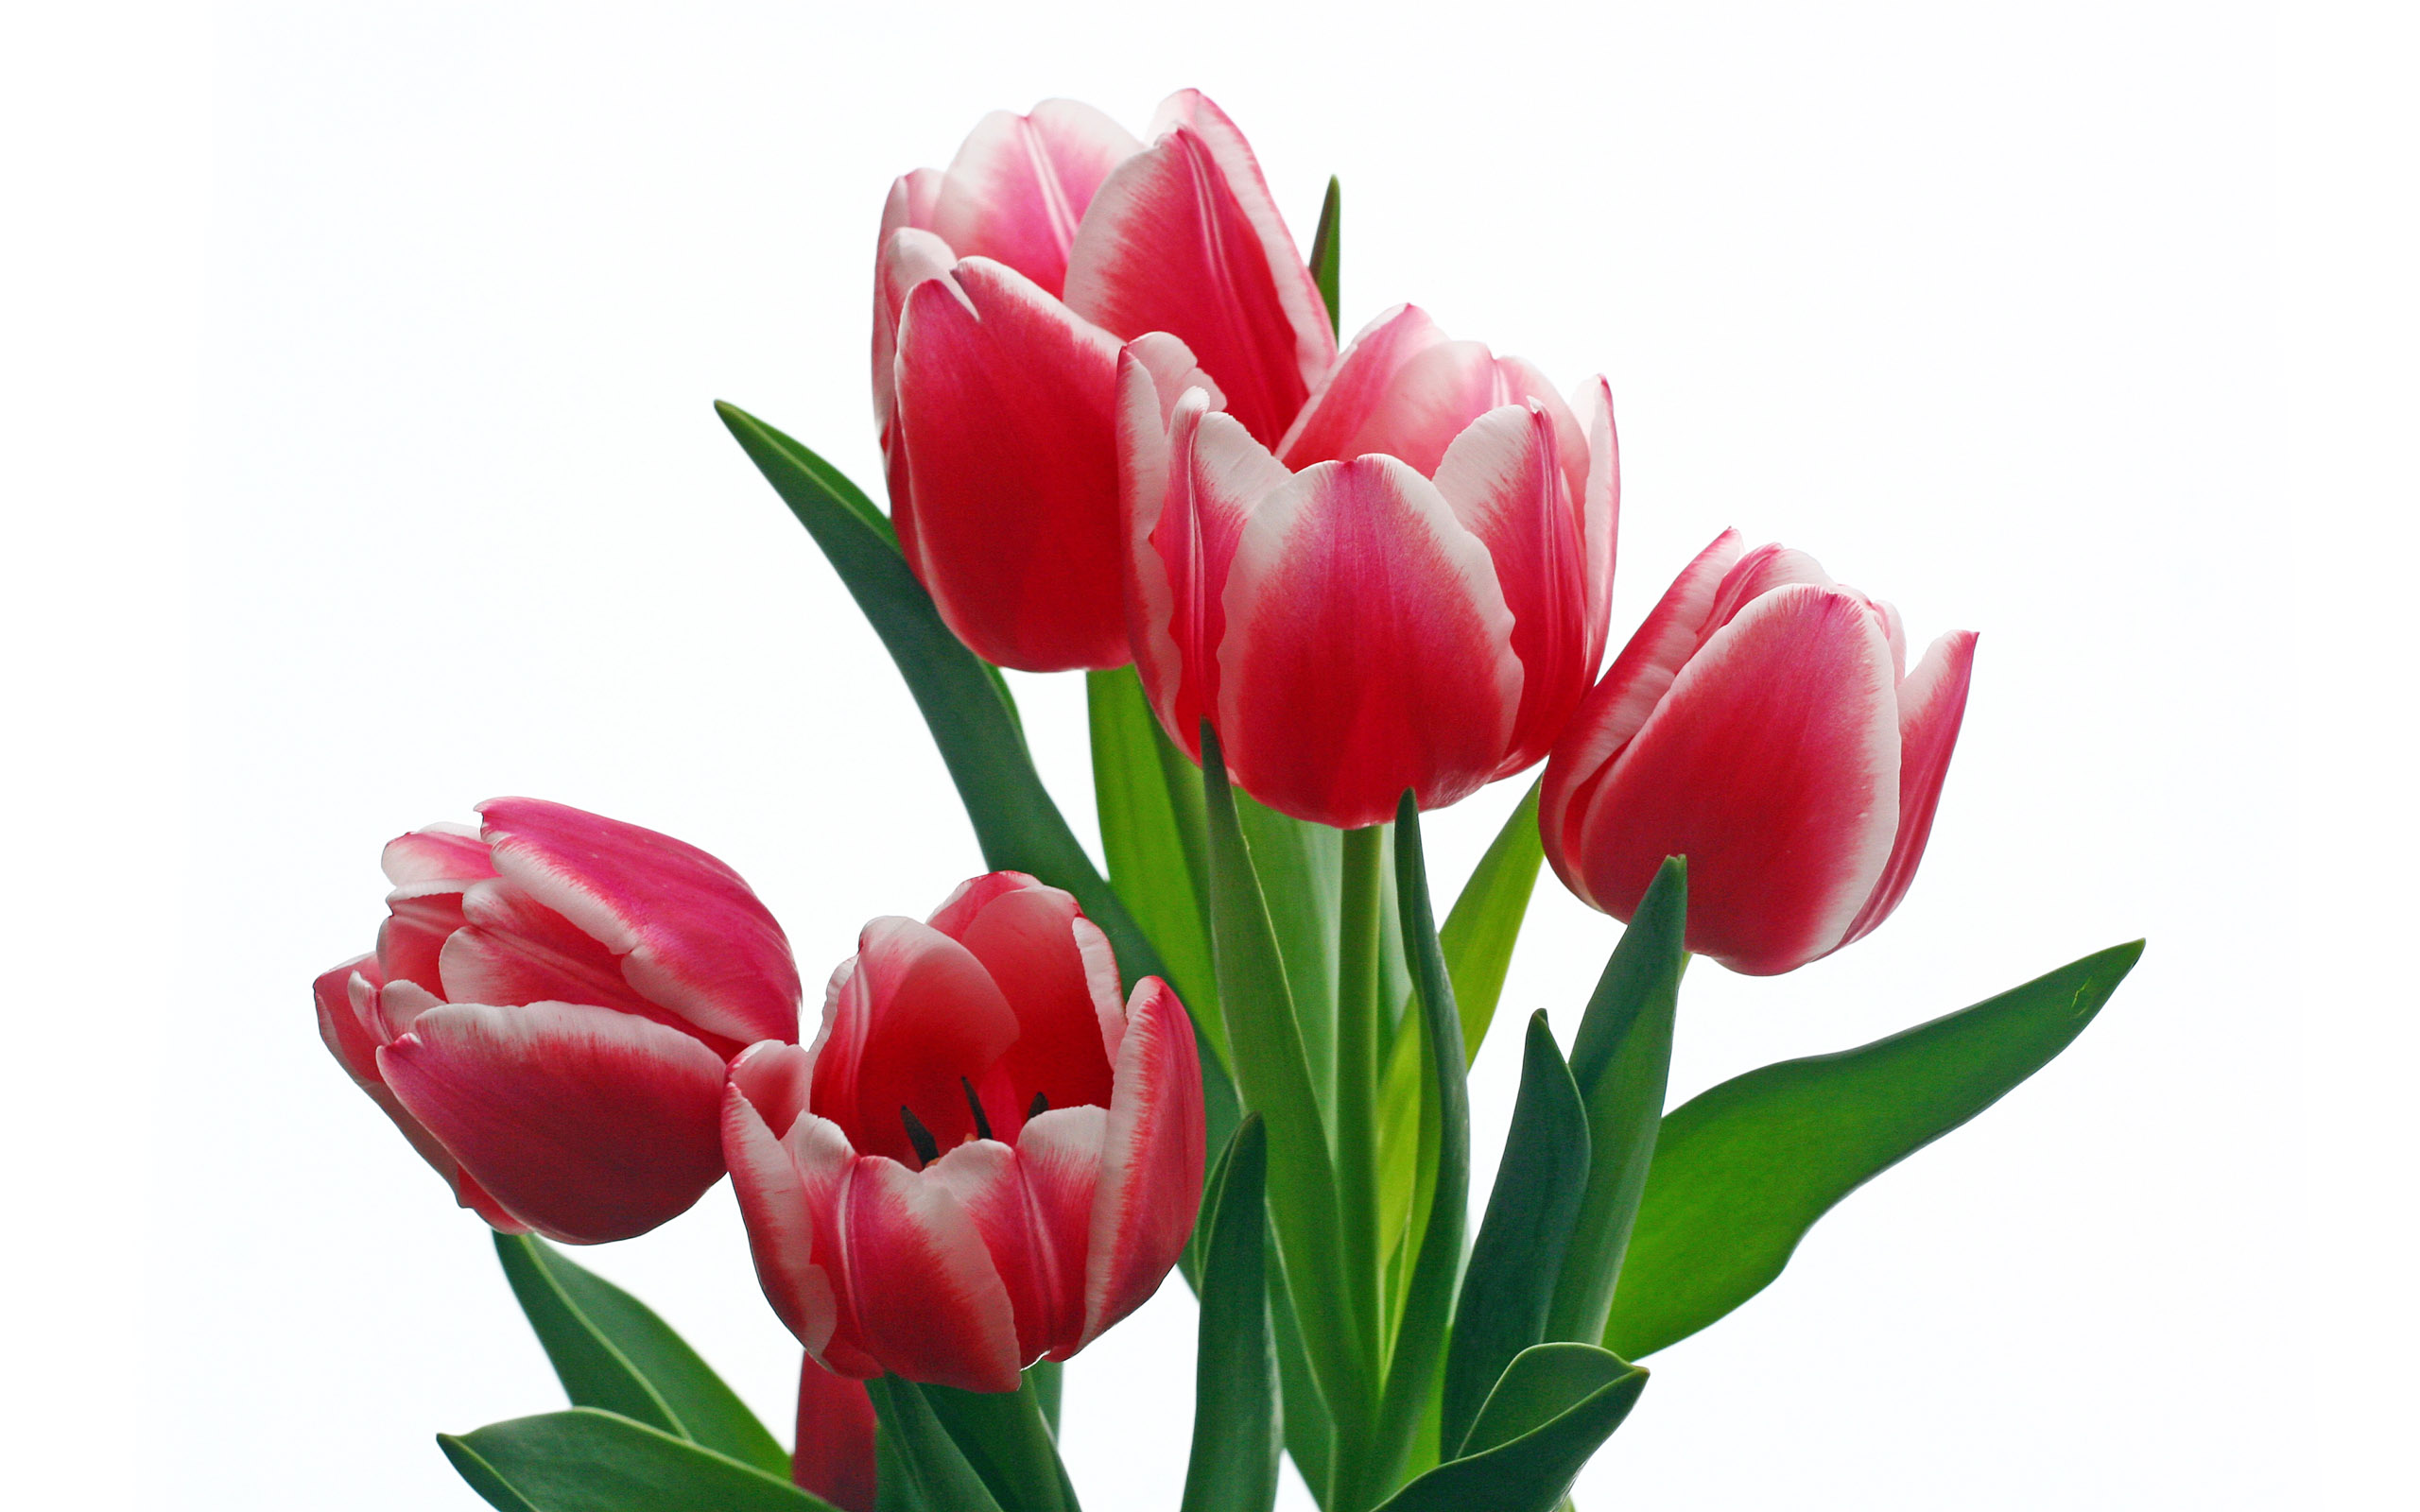 Gorgious Tulips HD Wallpaper And Drop A Ment About Our Post